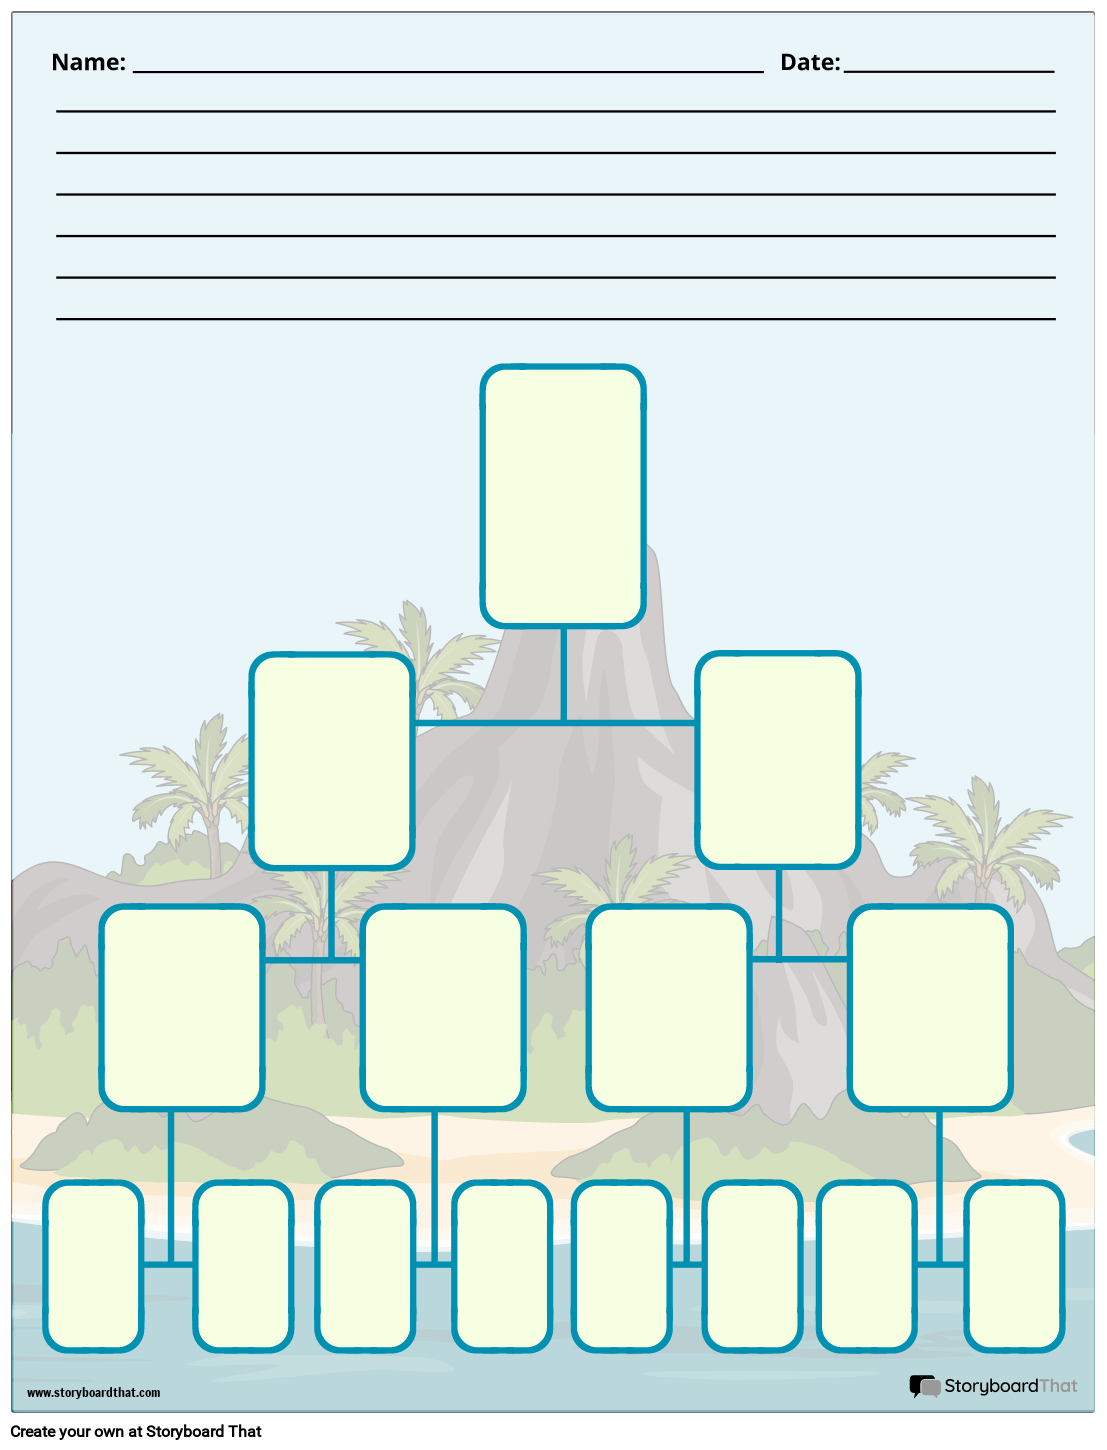 New Create Page Tree Diagram Template 4